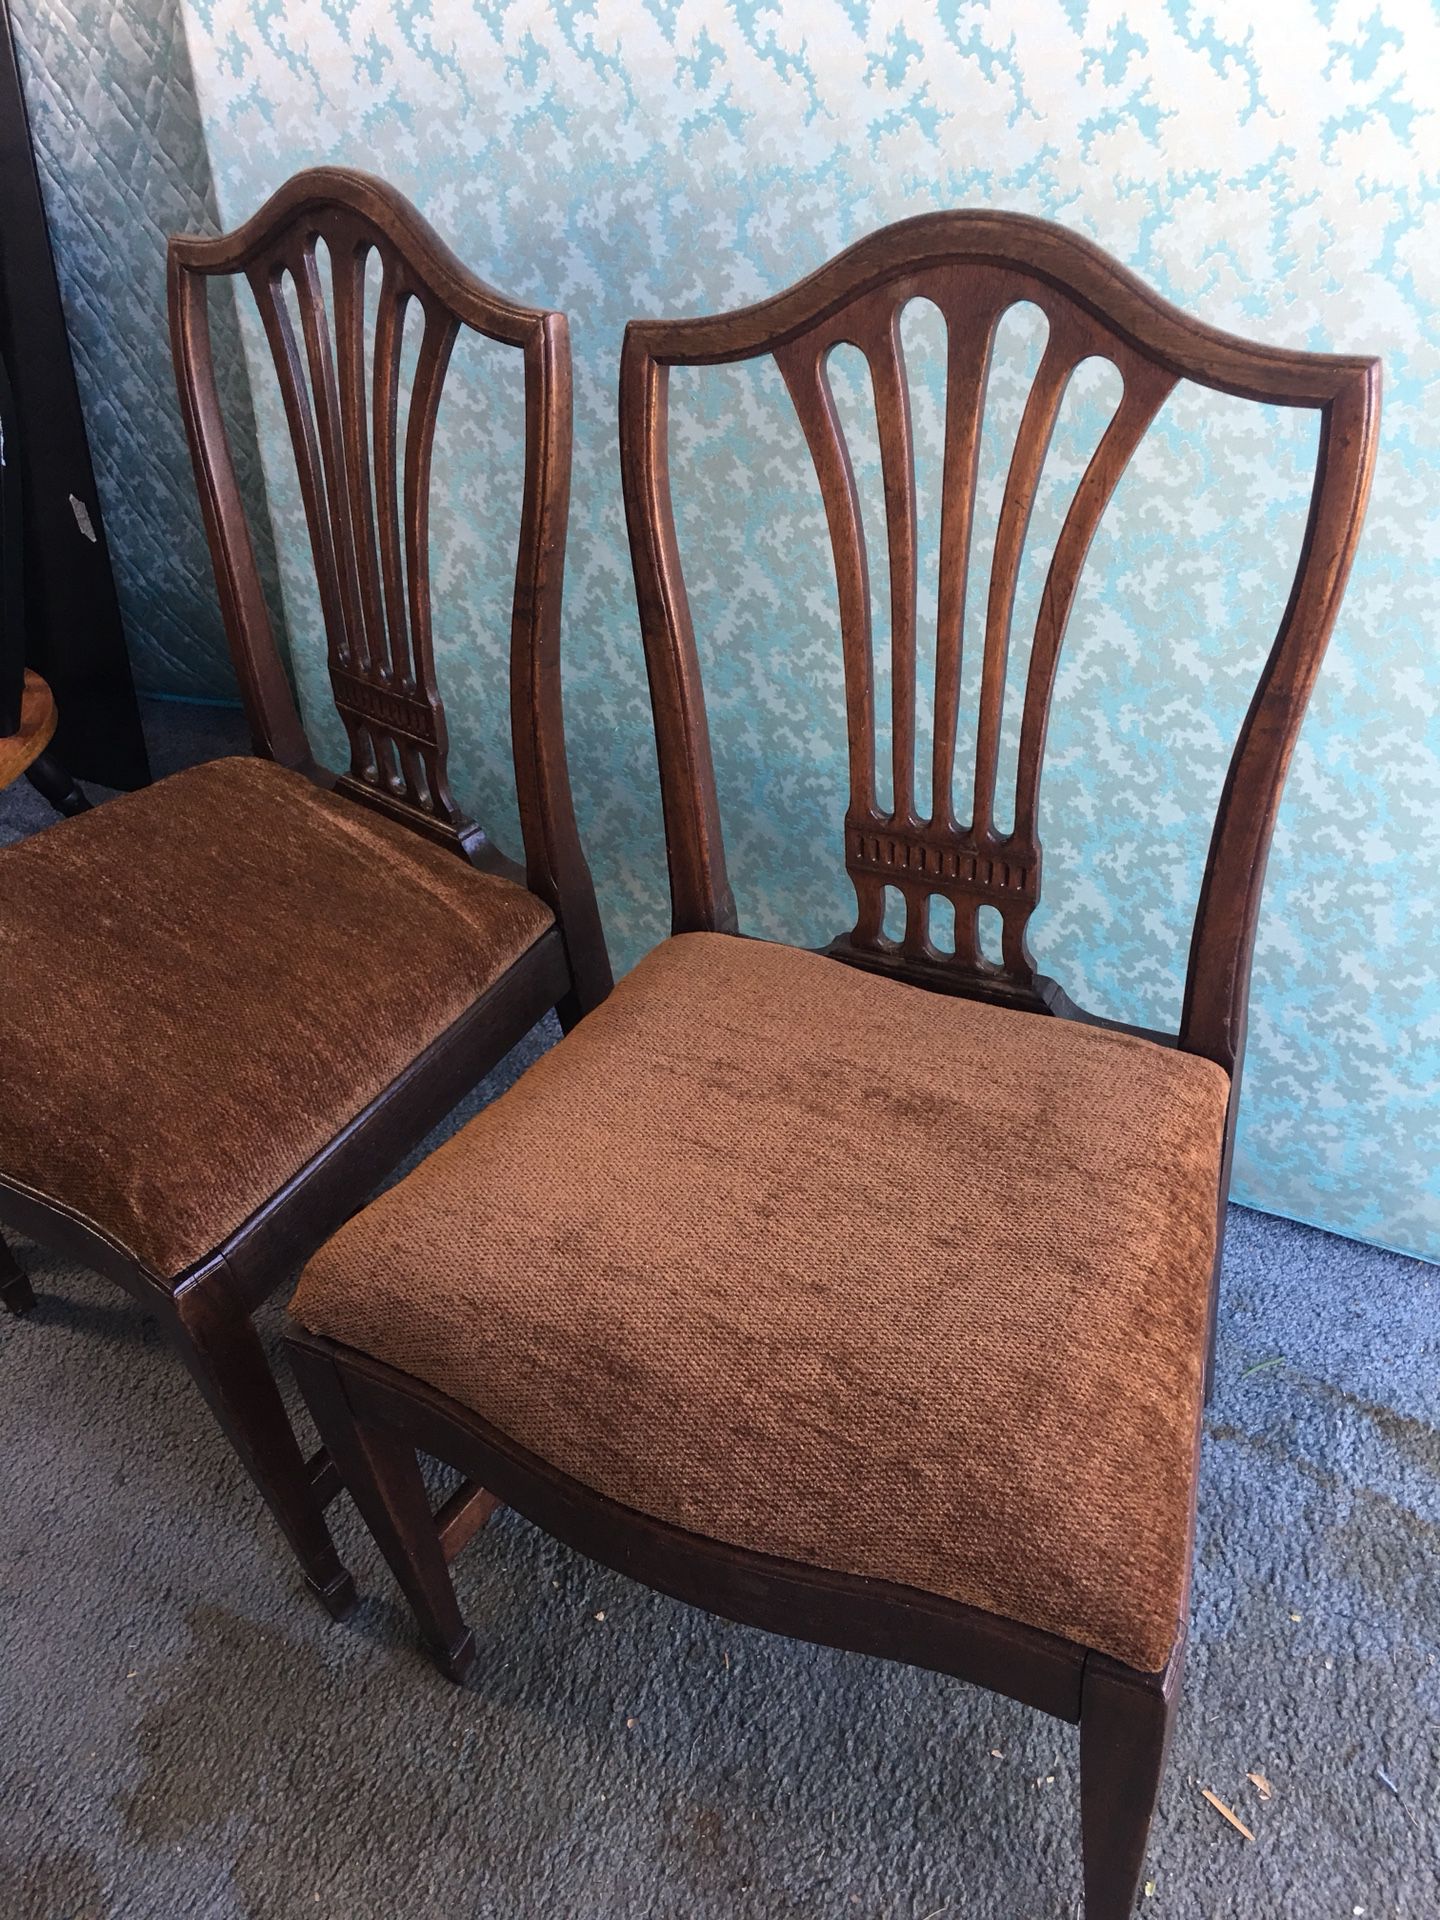 Two antique chairs redone $25 for both